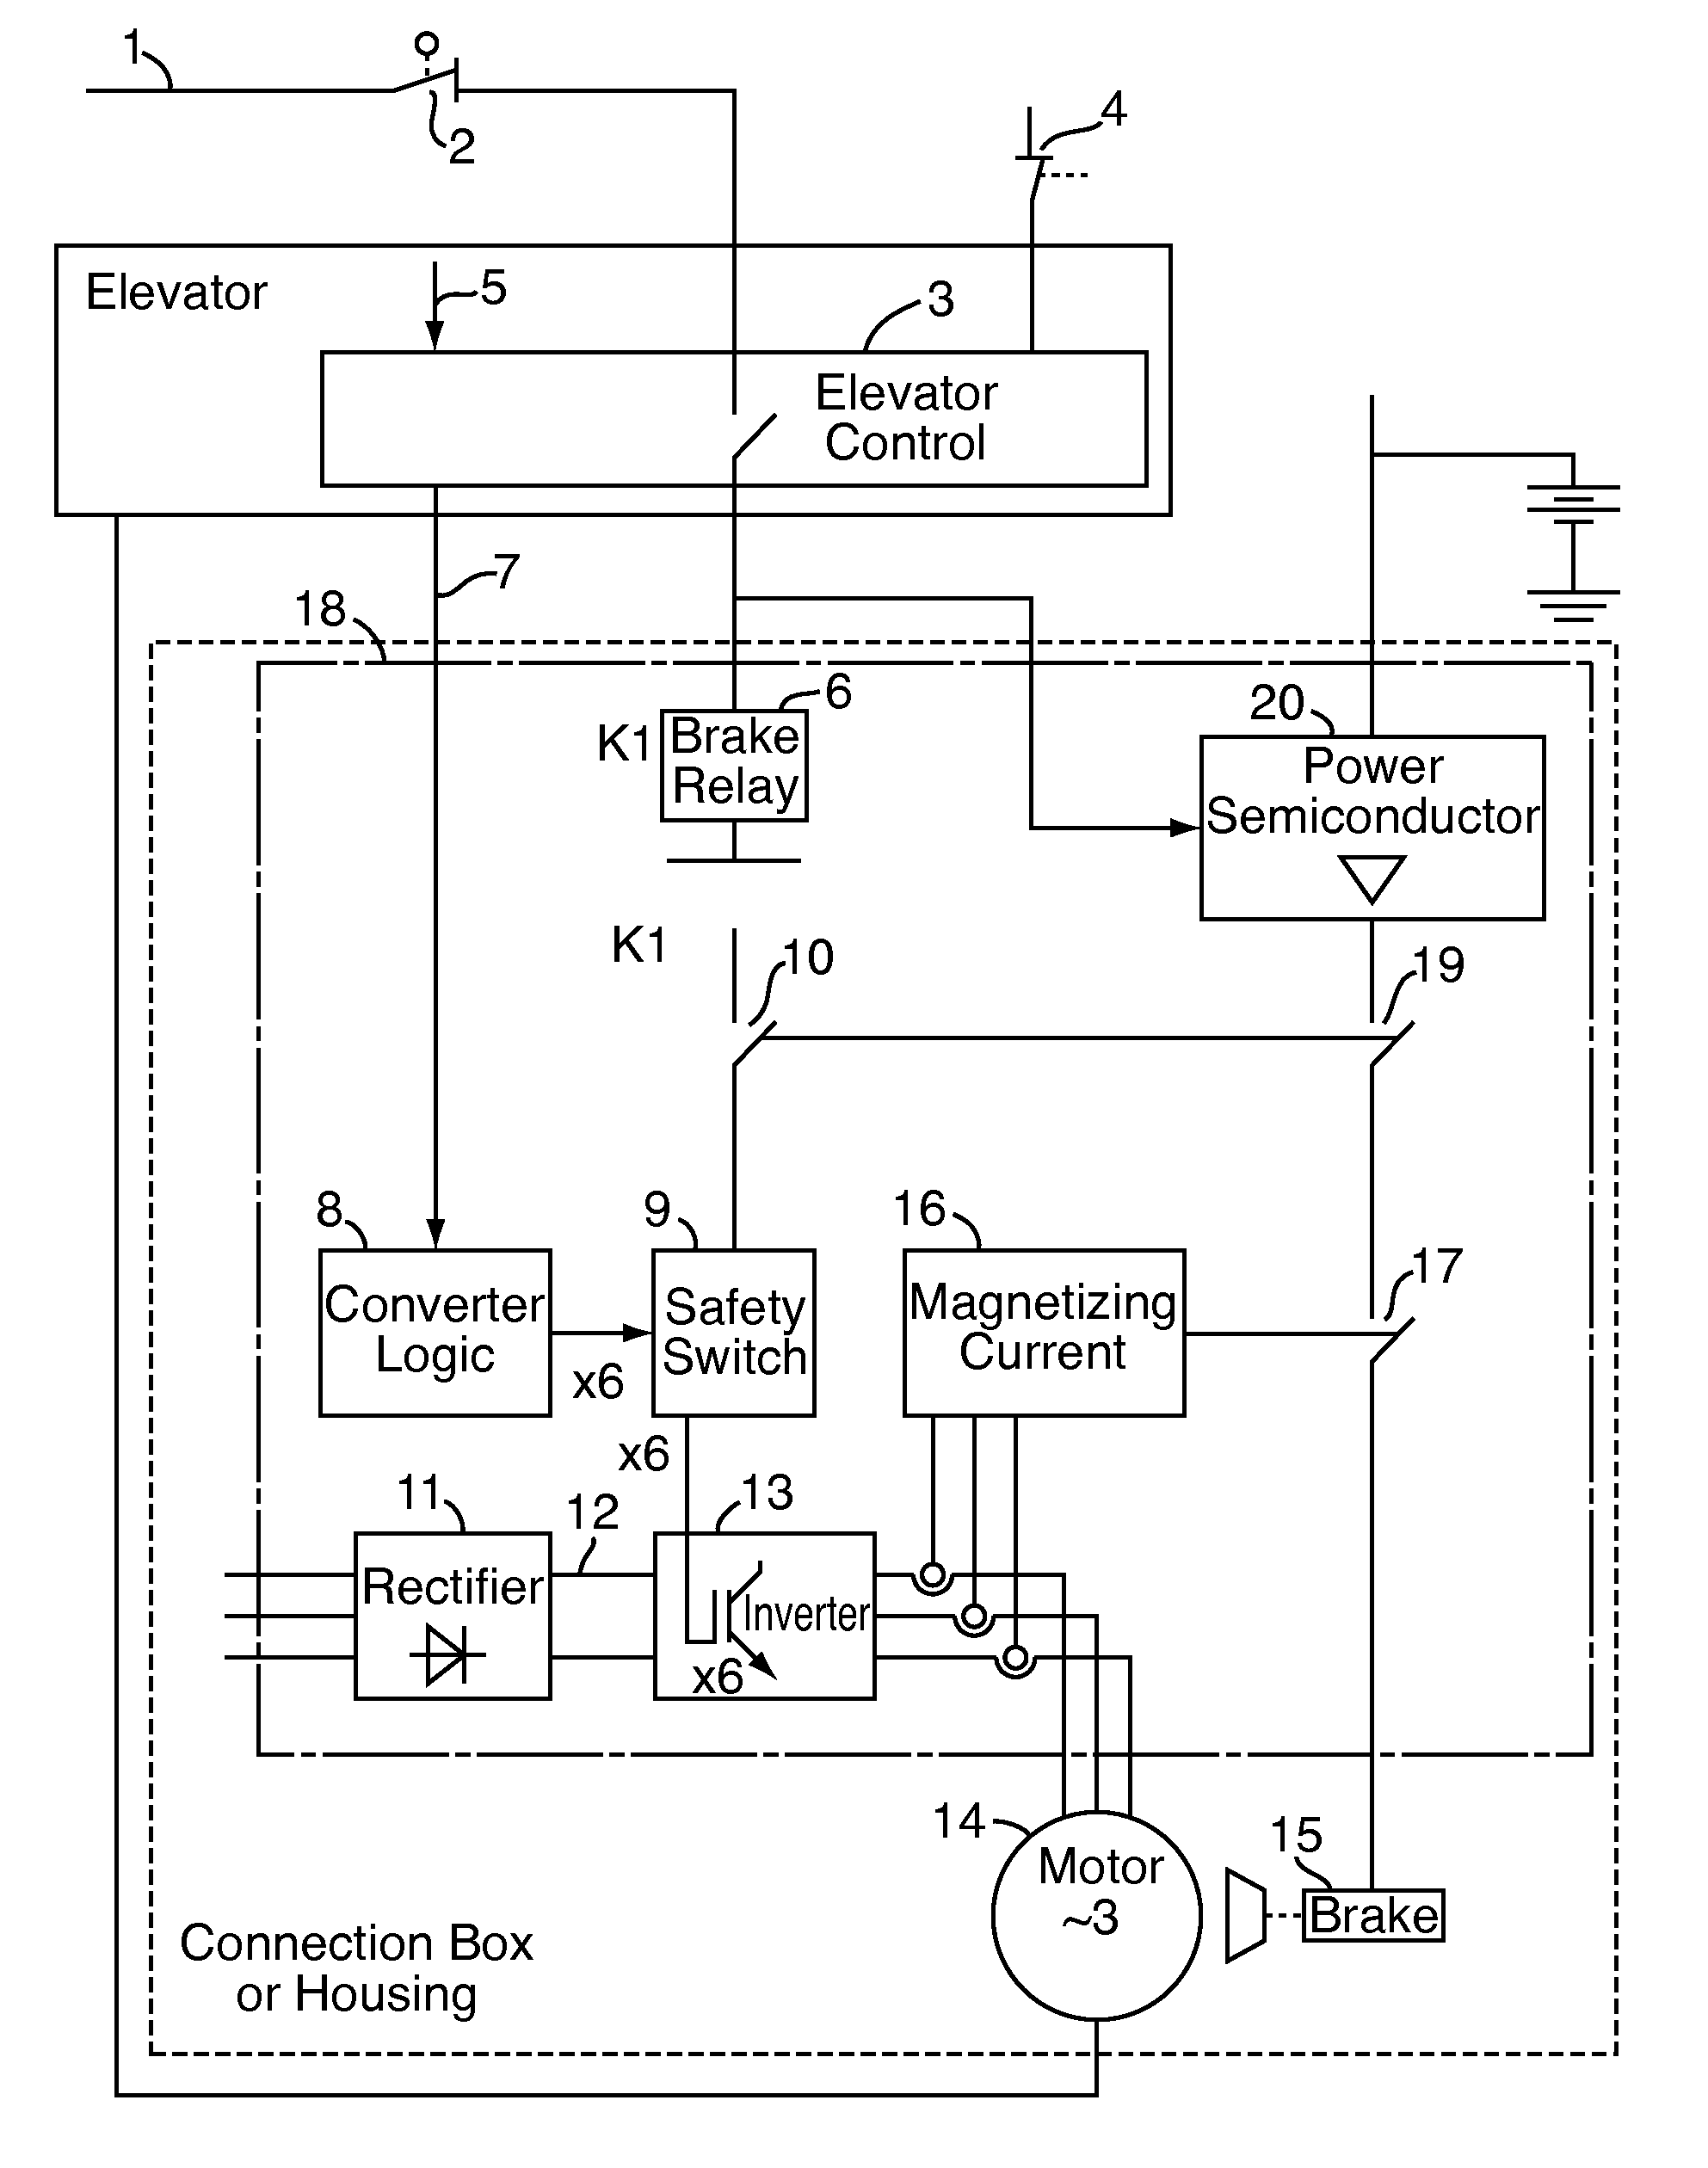 Method and system for stopping elevators using AC motors driven by static frequency converters